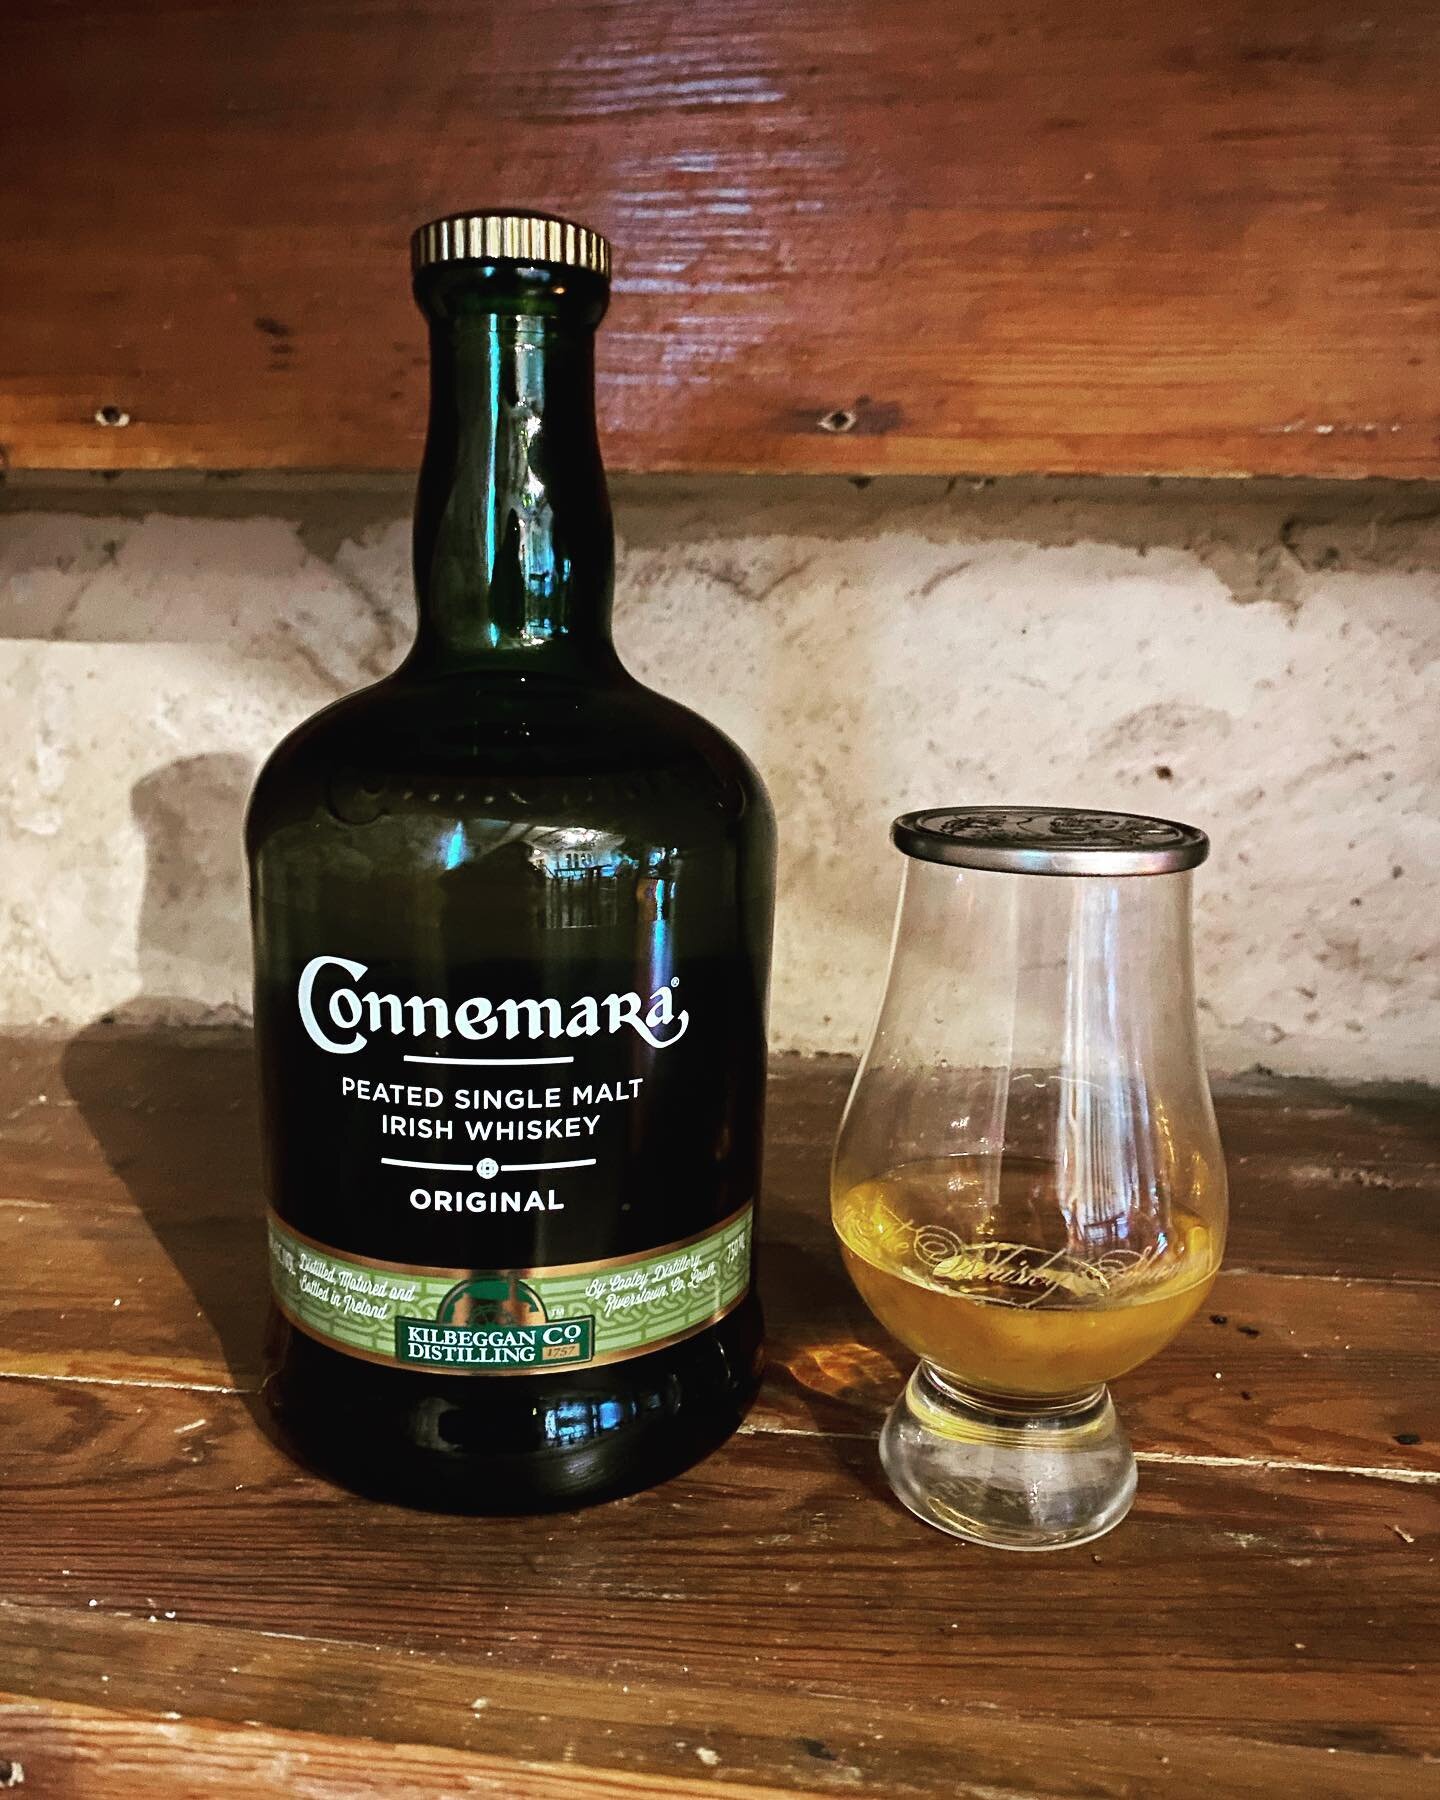 Welcome back to another Sunday Deep Dive.  Tonite we are breaking into Connemara Peated Irish Whiskey.  I know all you bourbon people out there are gonna pass by, but this young lad is a subtle ease into smoky whiskey.  Follow me on this flavor journ